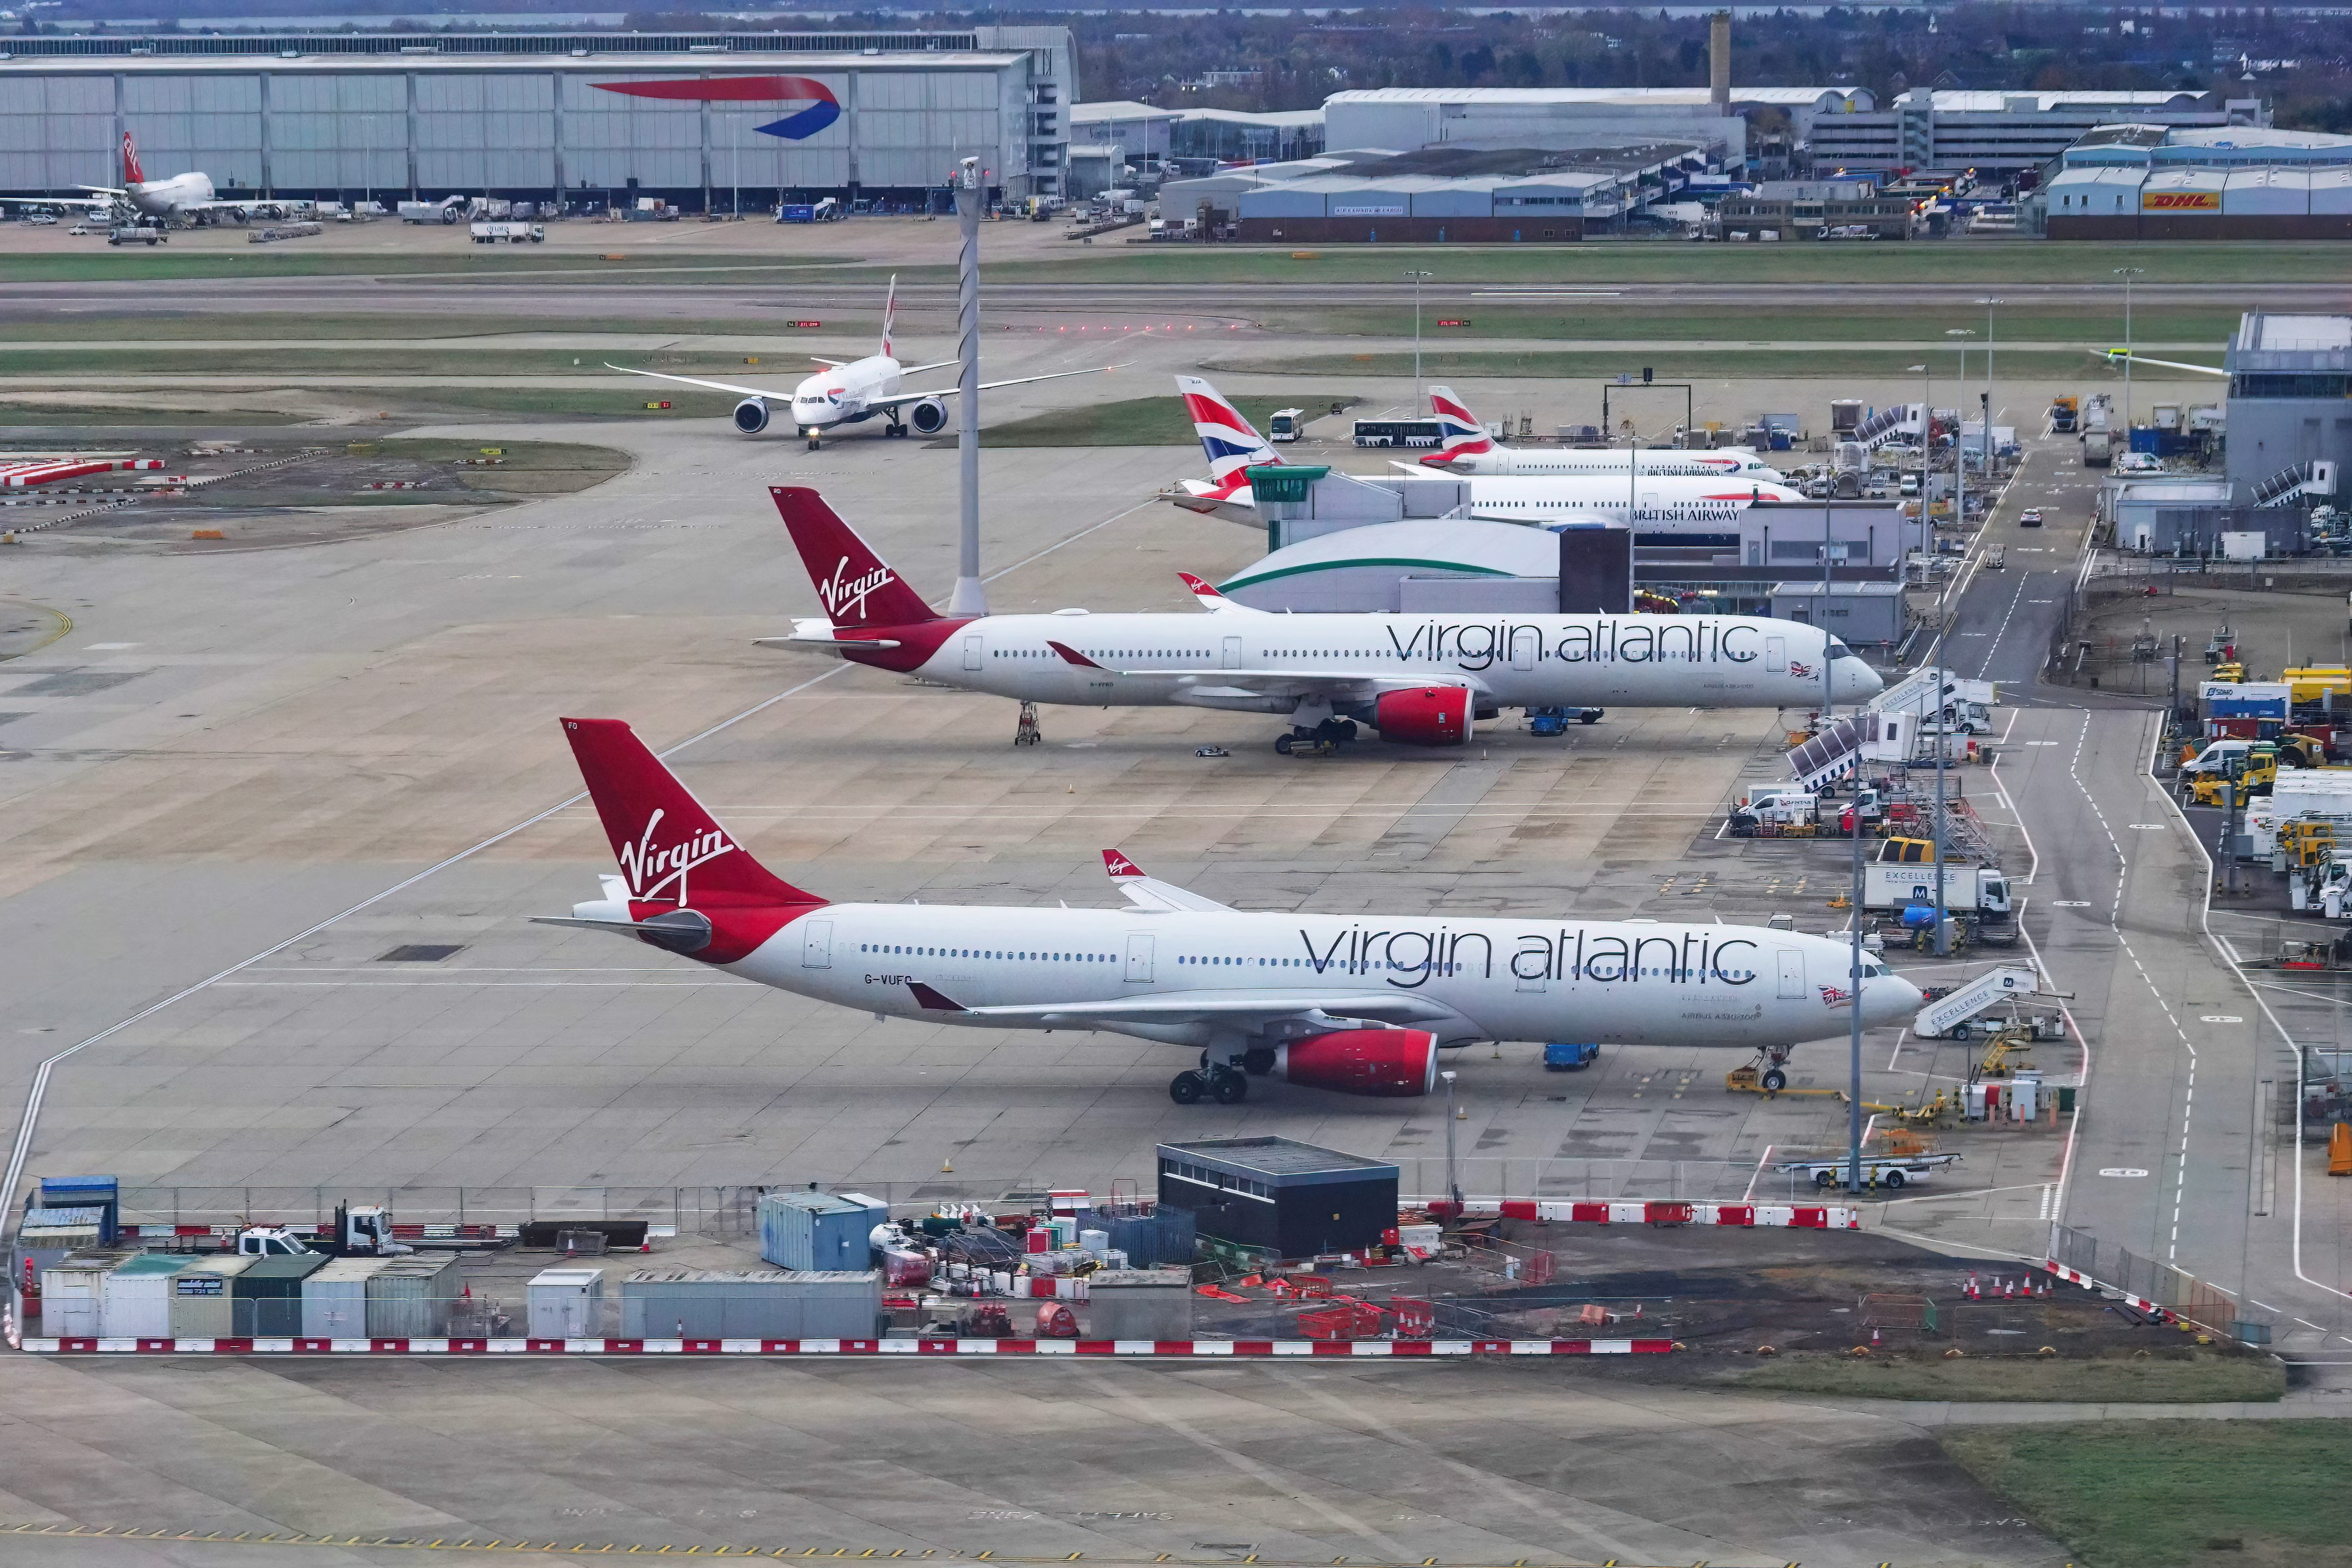 Two Virgin Atlantic and British Airways aircraft on the apron at London Heathrow airport.